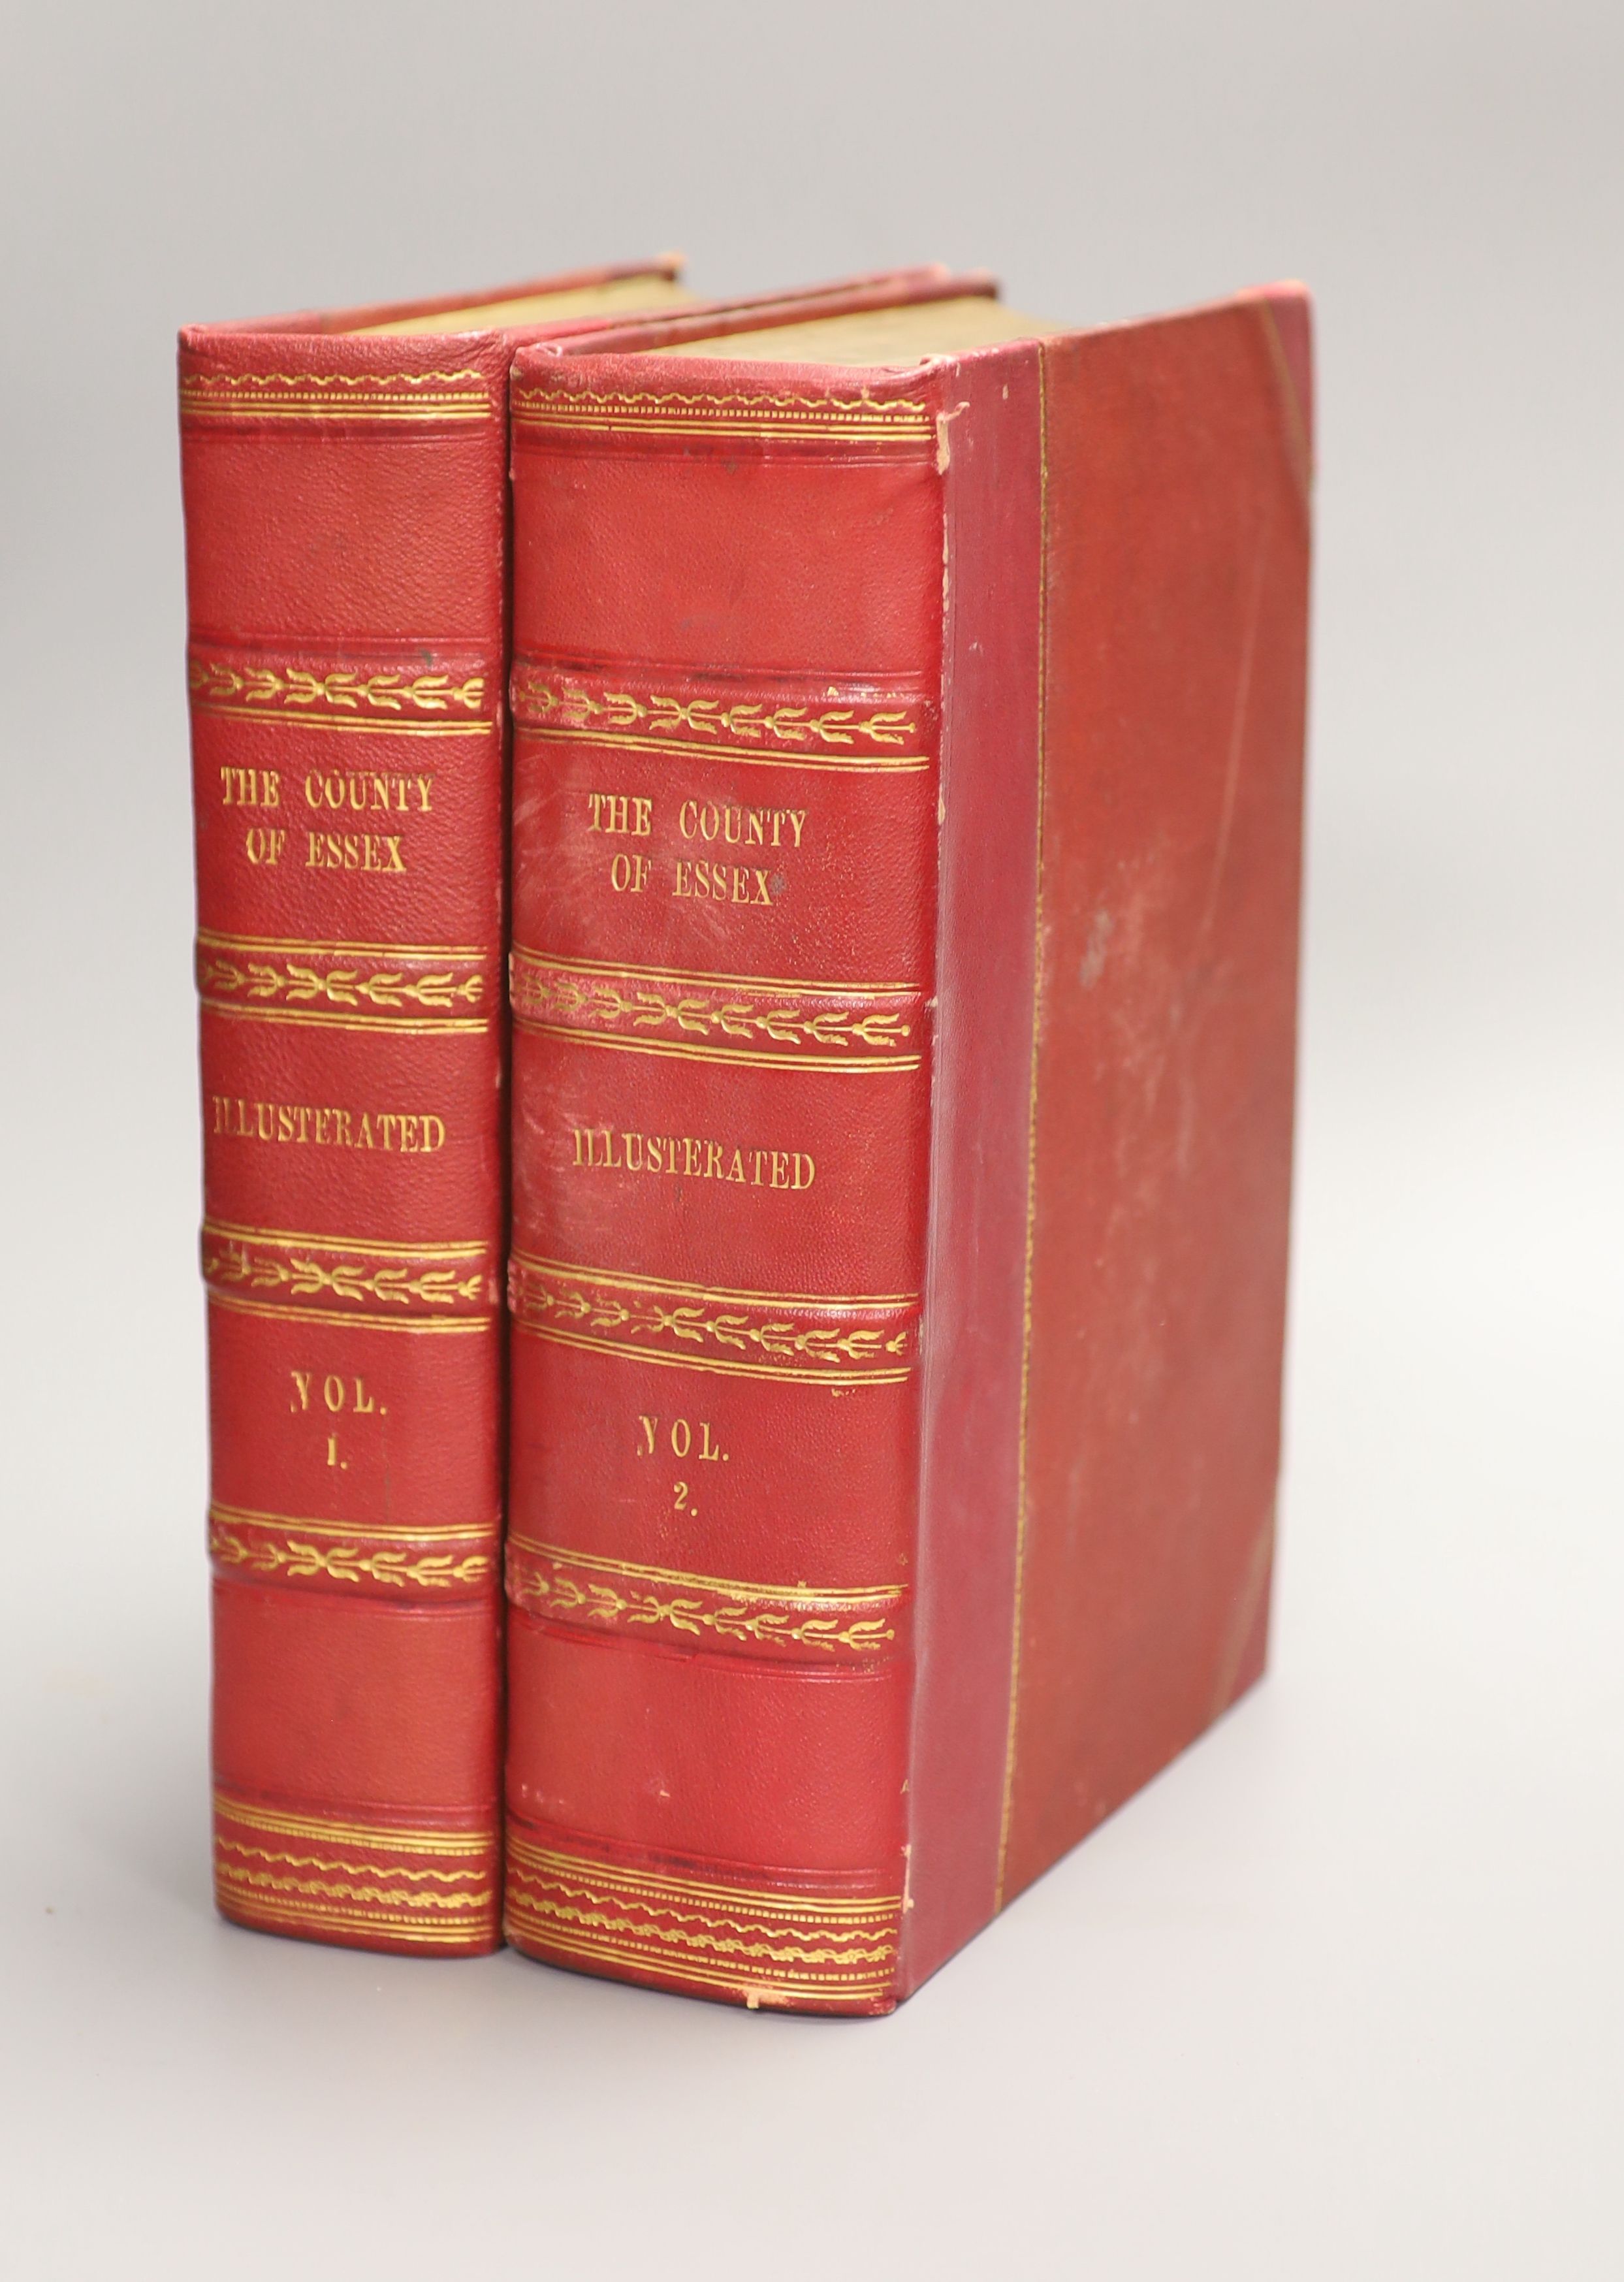 Wright, Thomas - The History and Topography of the County of Essex, 2 vols, pictorial and printed titles, 99 engraved plates and folded map, subscibers list; later 19th century gilt red half morocco and cloth with panell